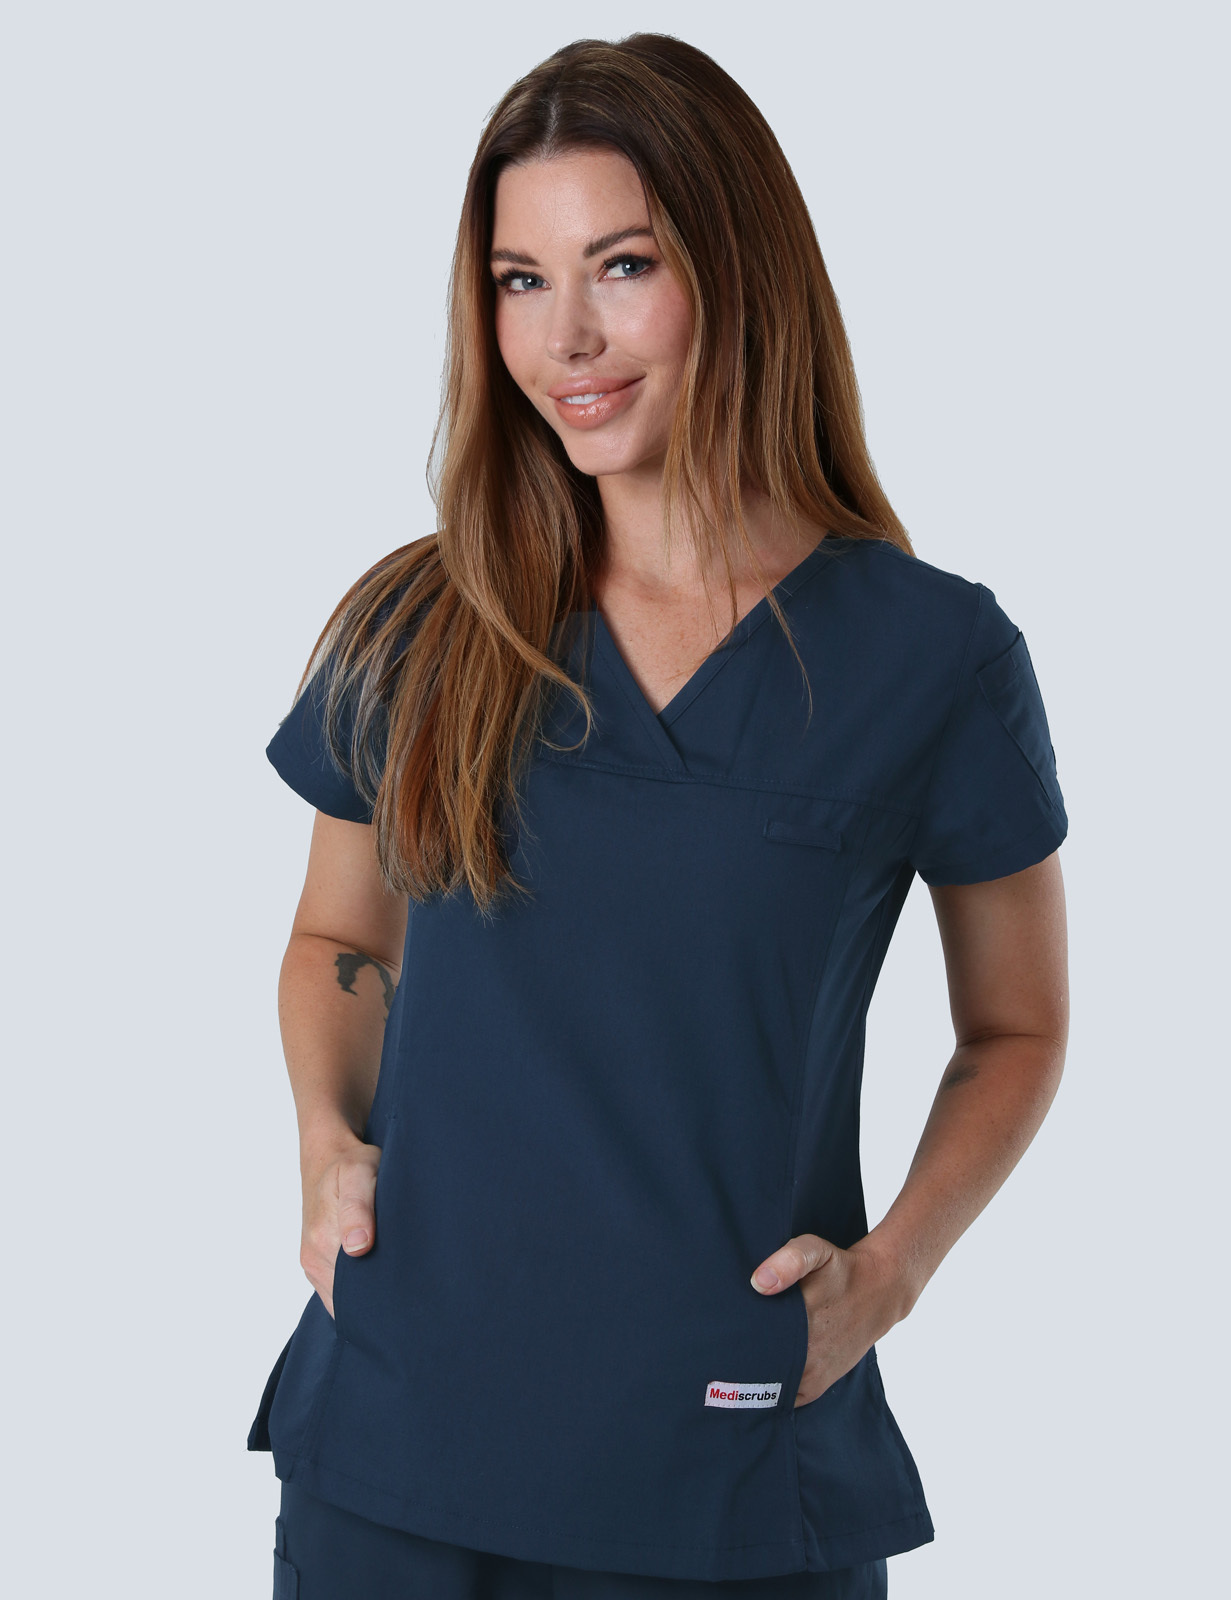 Taalk Skin Clinic (Women's Fit Solid Top and Cargo Pants in Navy incl Logos)